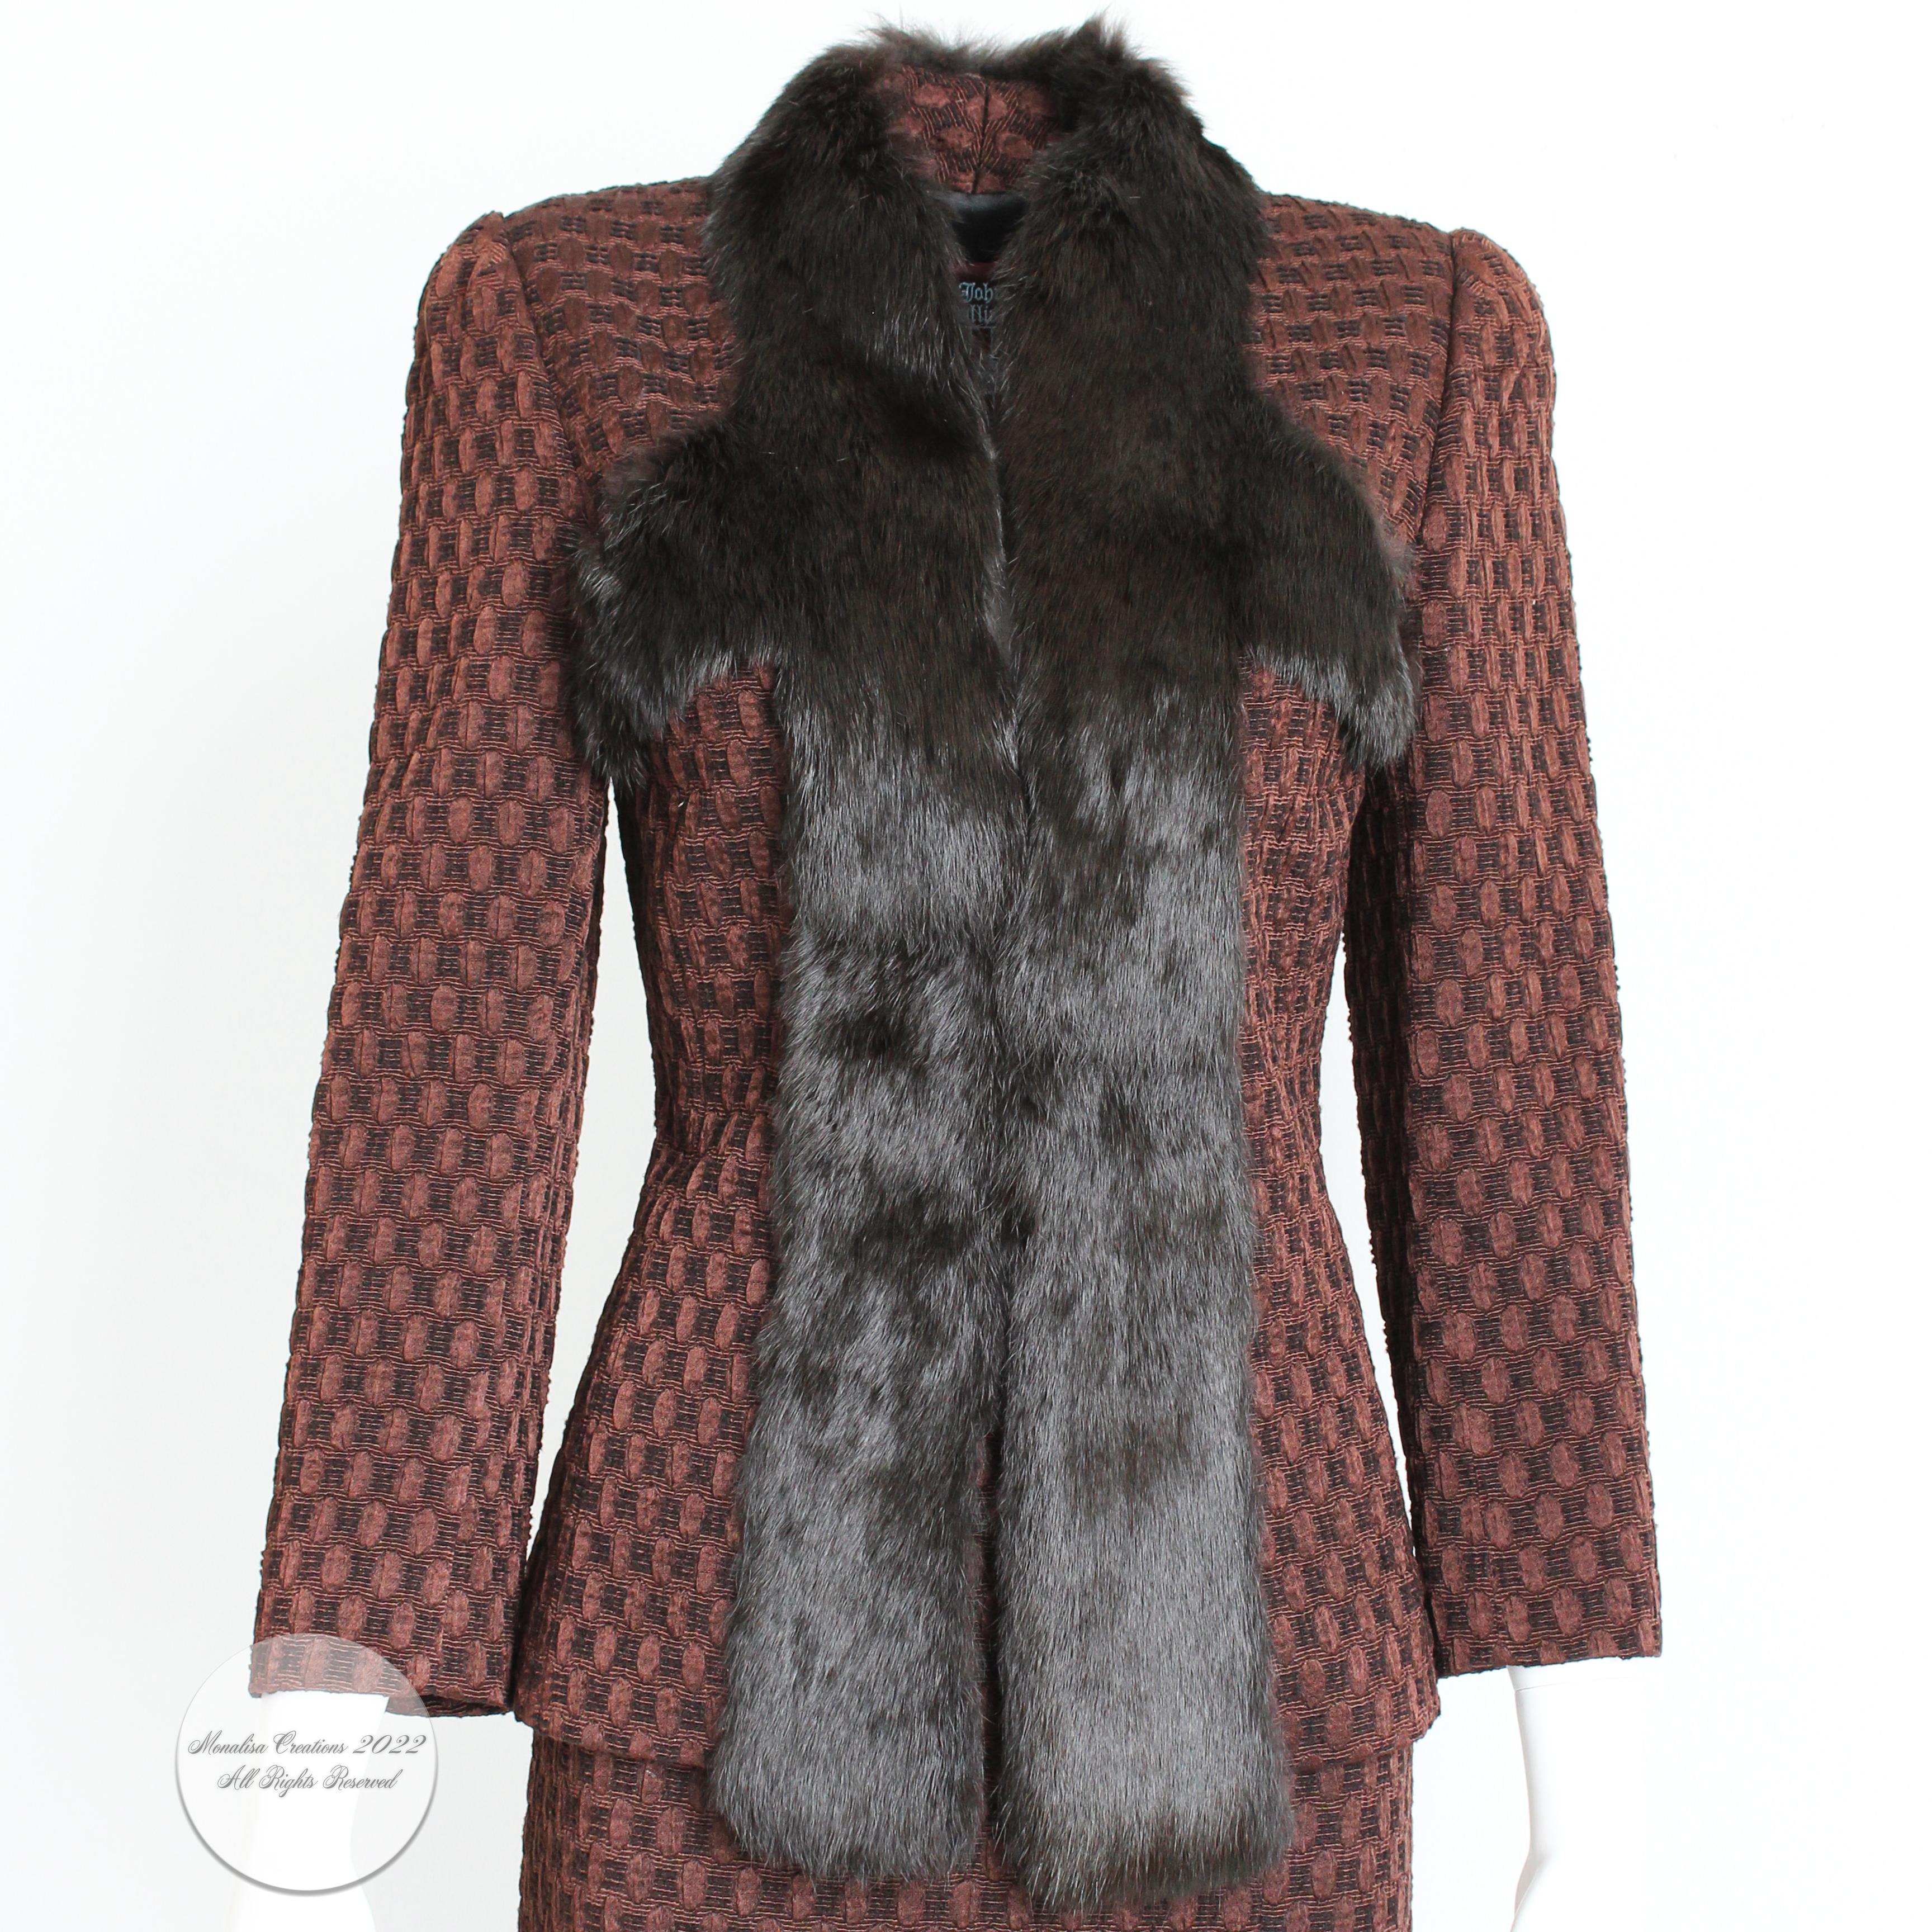 This incredible jacket and skirt ensemble was made by John Galliano, most likely in the late 90s or early 2000s. 

Made from a wonderful textured knit of brown silk and wool, the jacket is fitted and trimmed in supple Rex Rabbit fur.  The skirt